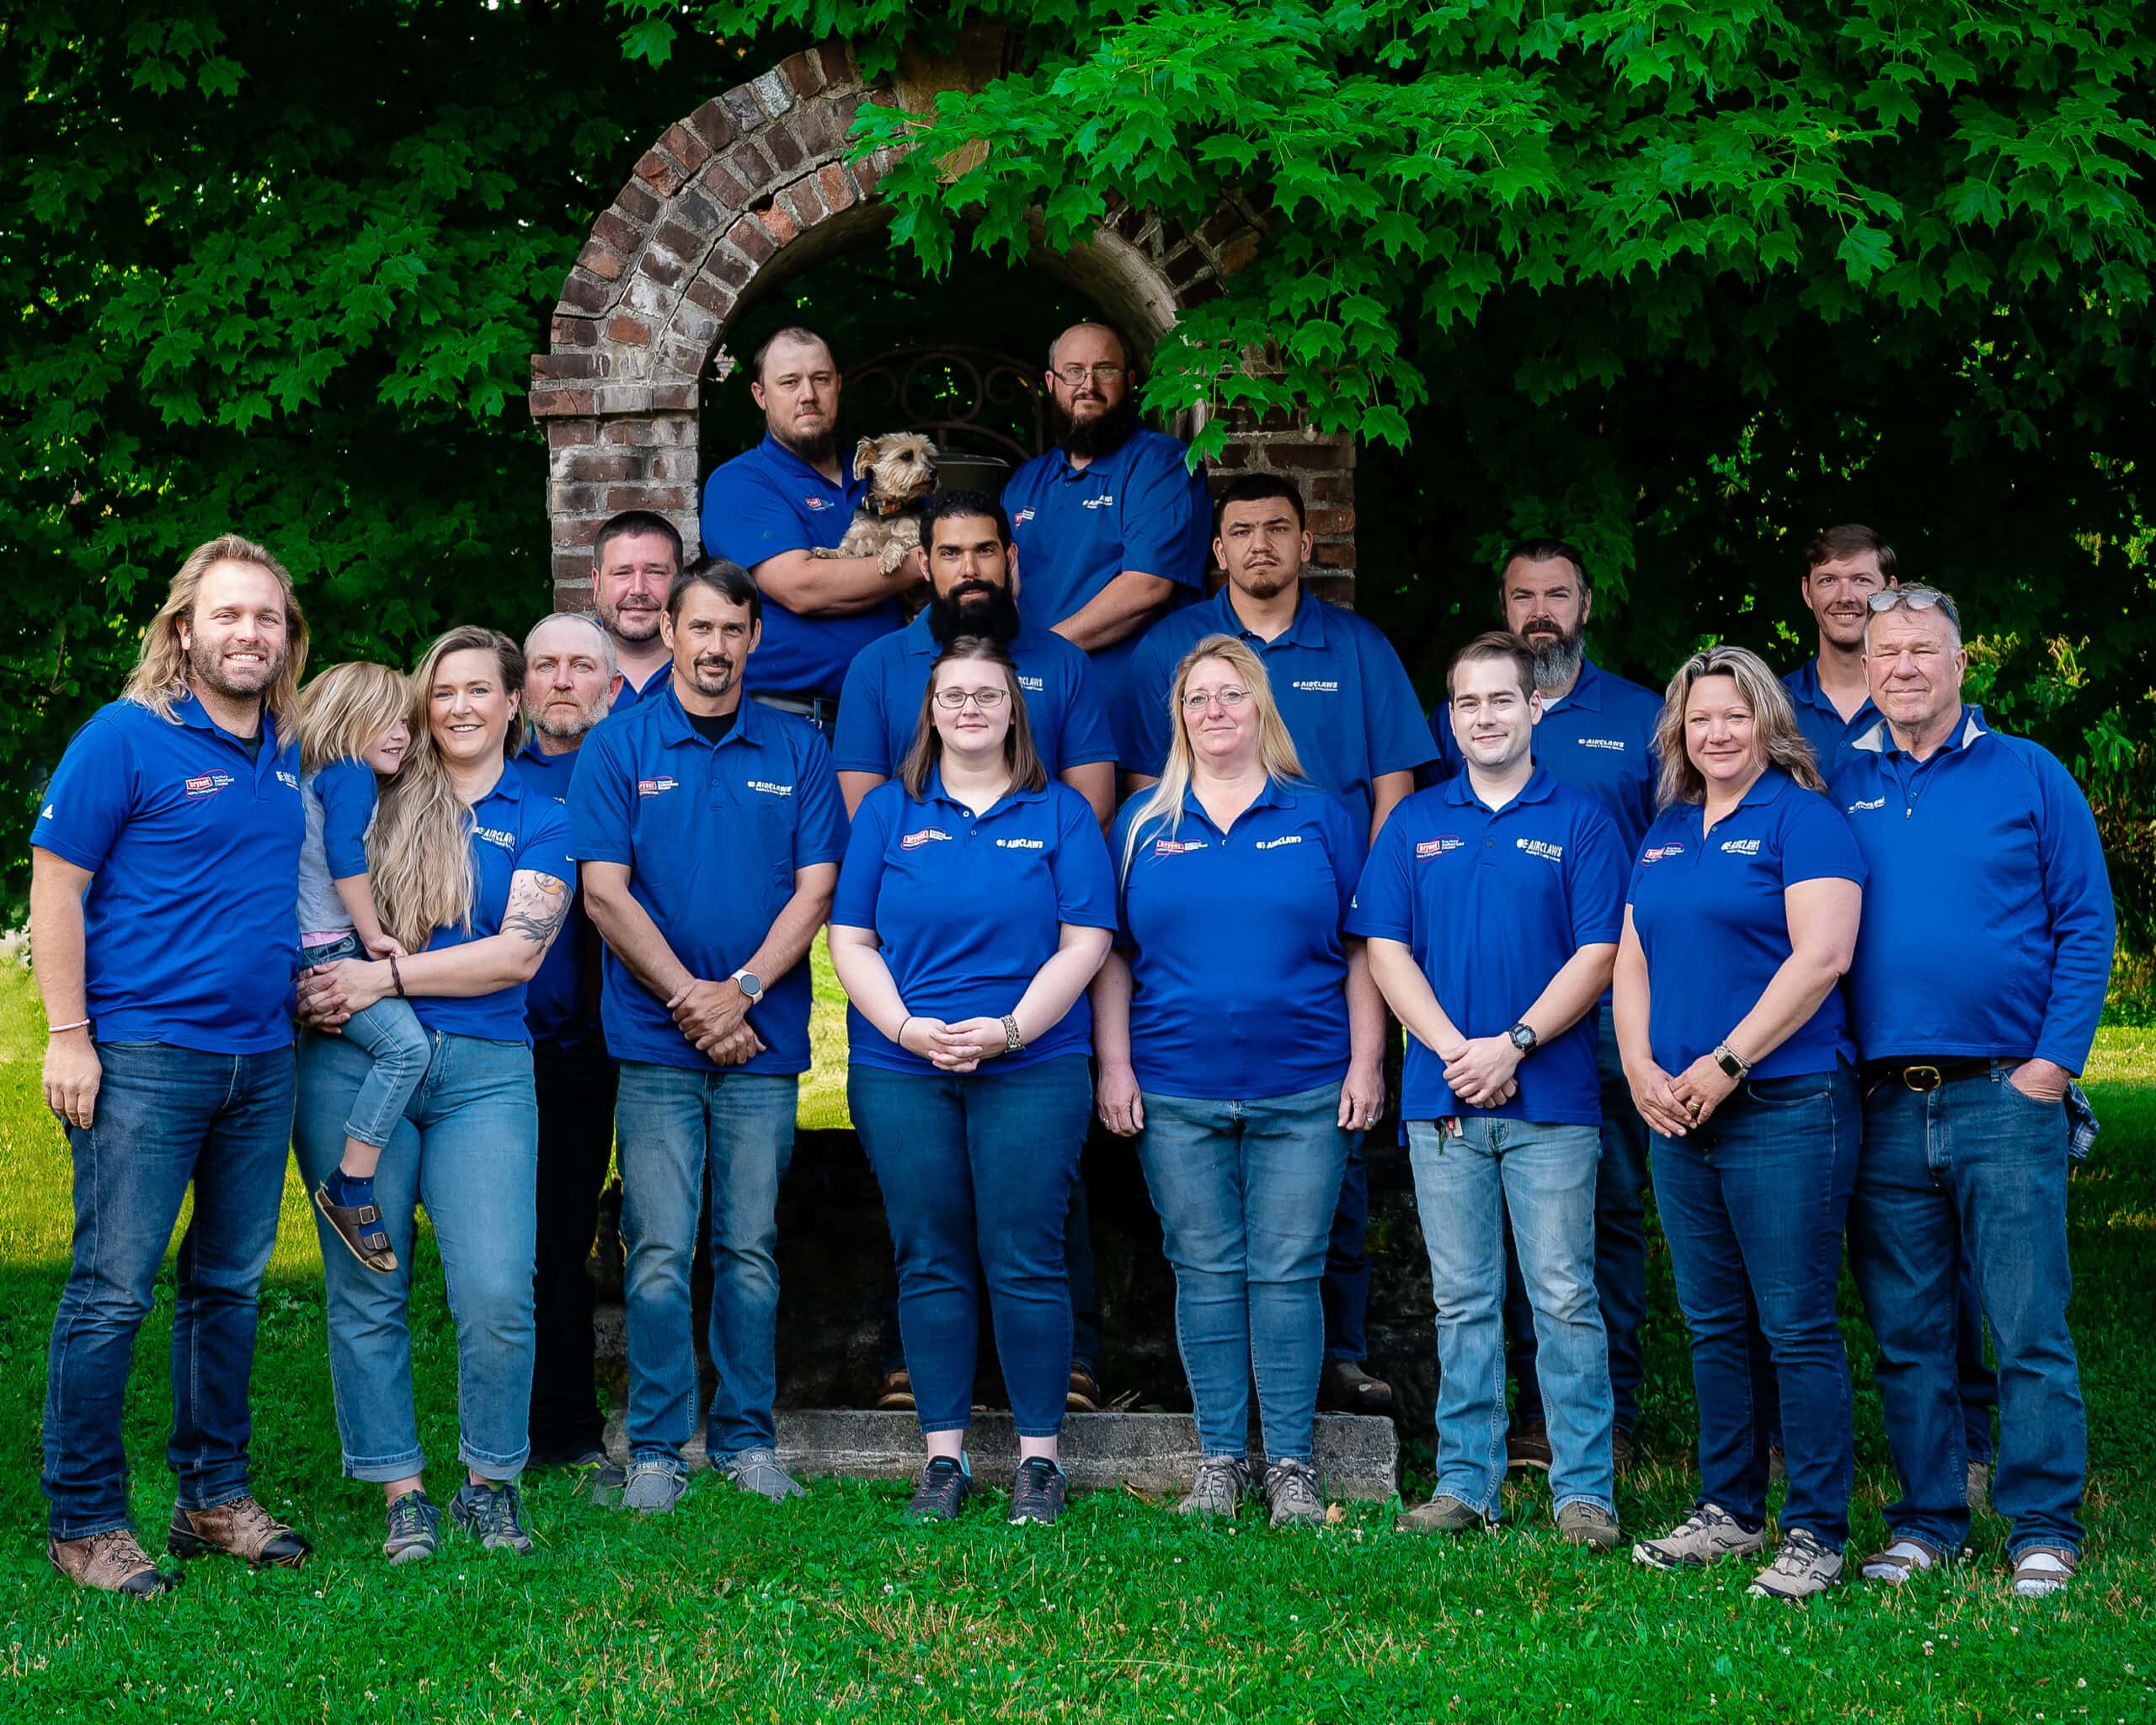 Airclaws Heating & Cooling Systems team photo.